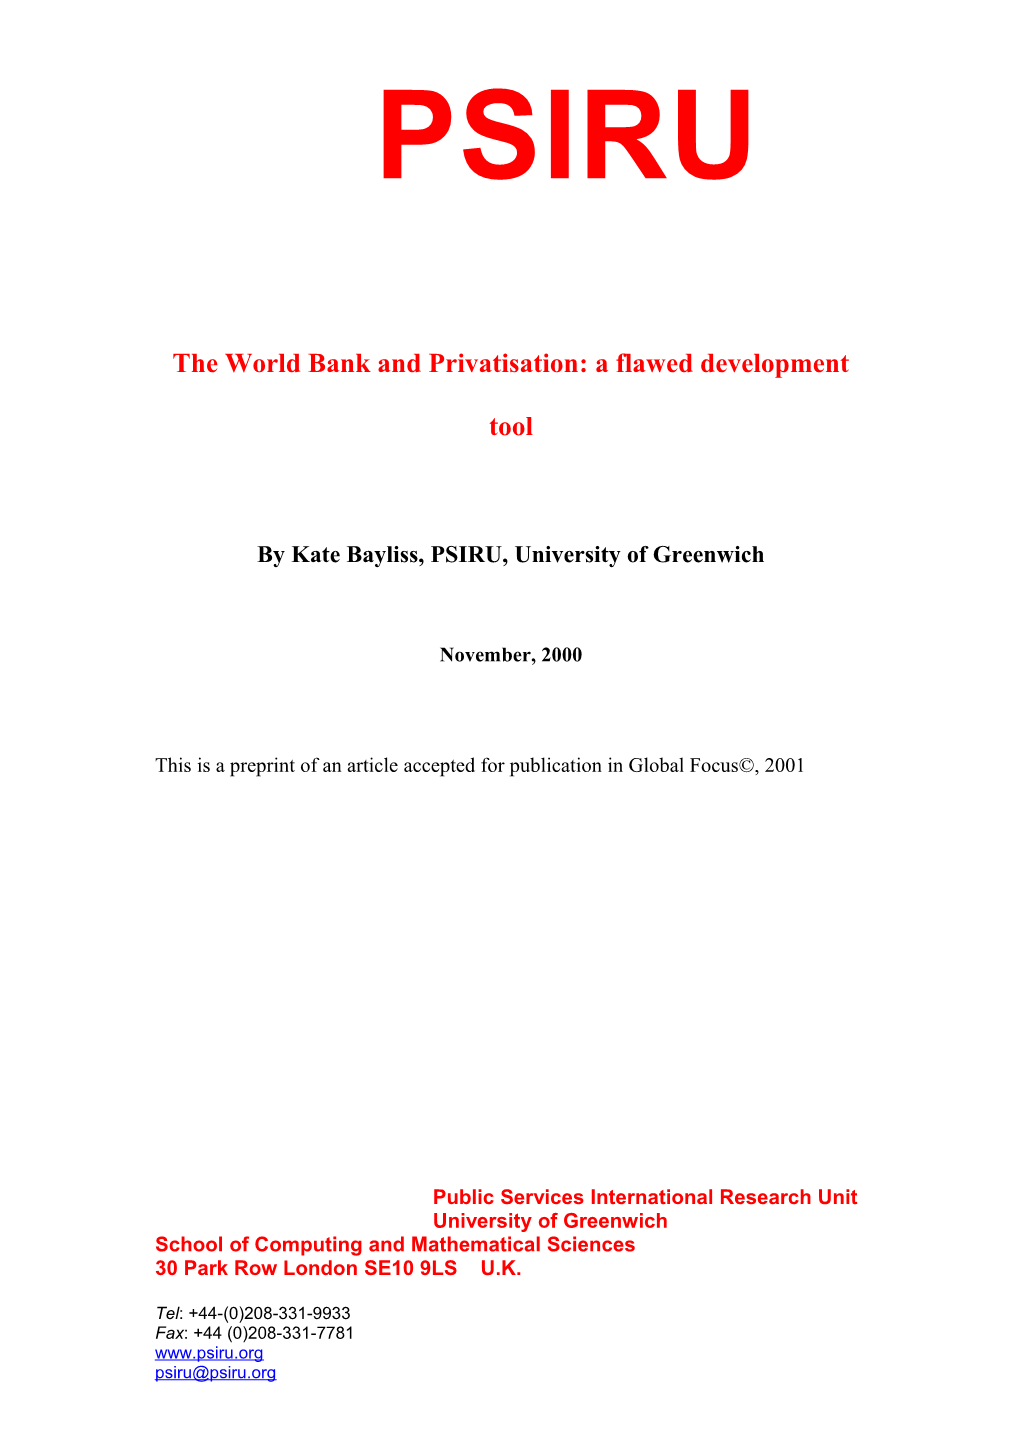 Global Focus Paper Critique of WB Privatisation Policy in SSA